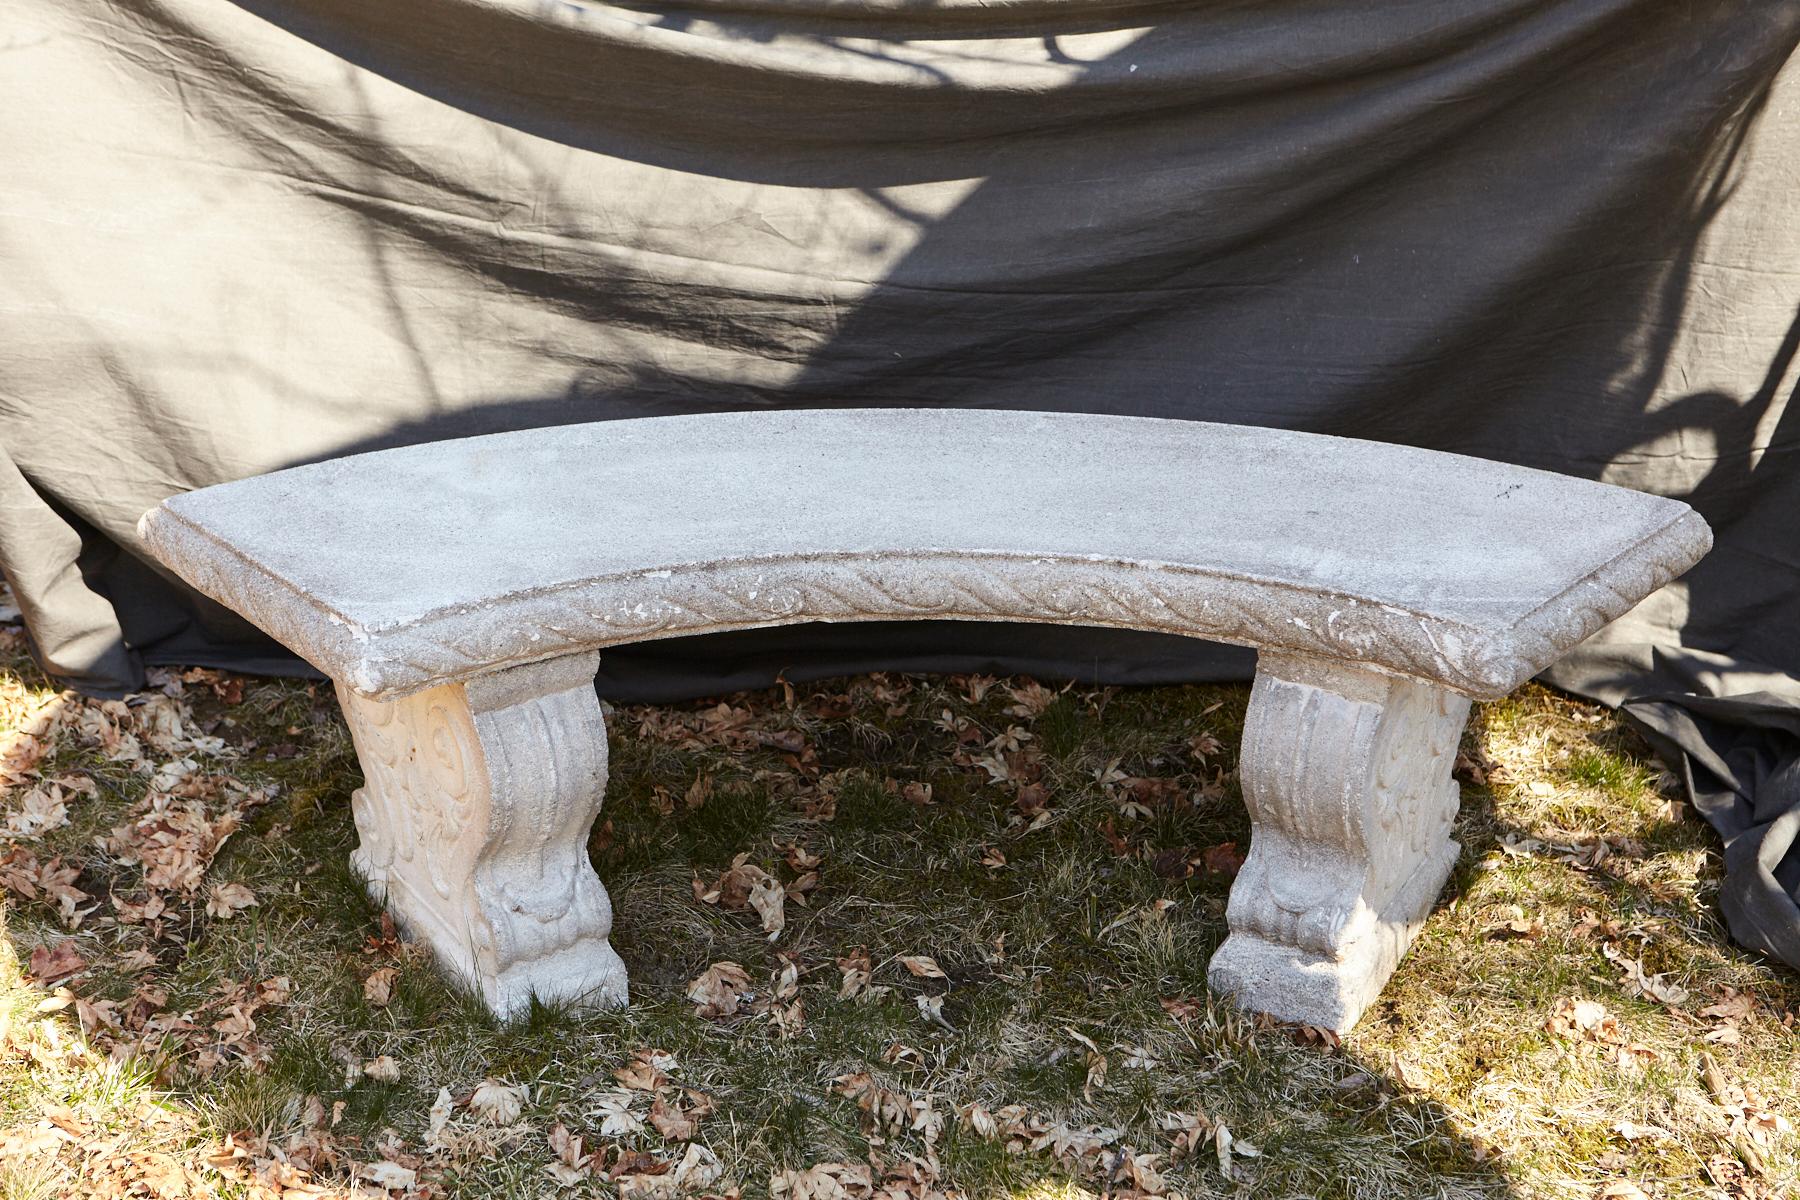 Curved cast stone bench with an ornamental carved band of alternating concave and convex sections around the flat seat, reminiscent of waves, mounted on carved legs with carved double-sided scrolled ornaments and leaves.
The bench has a very nice